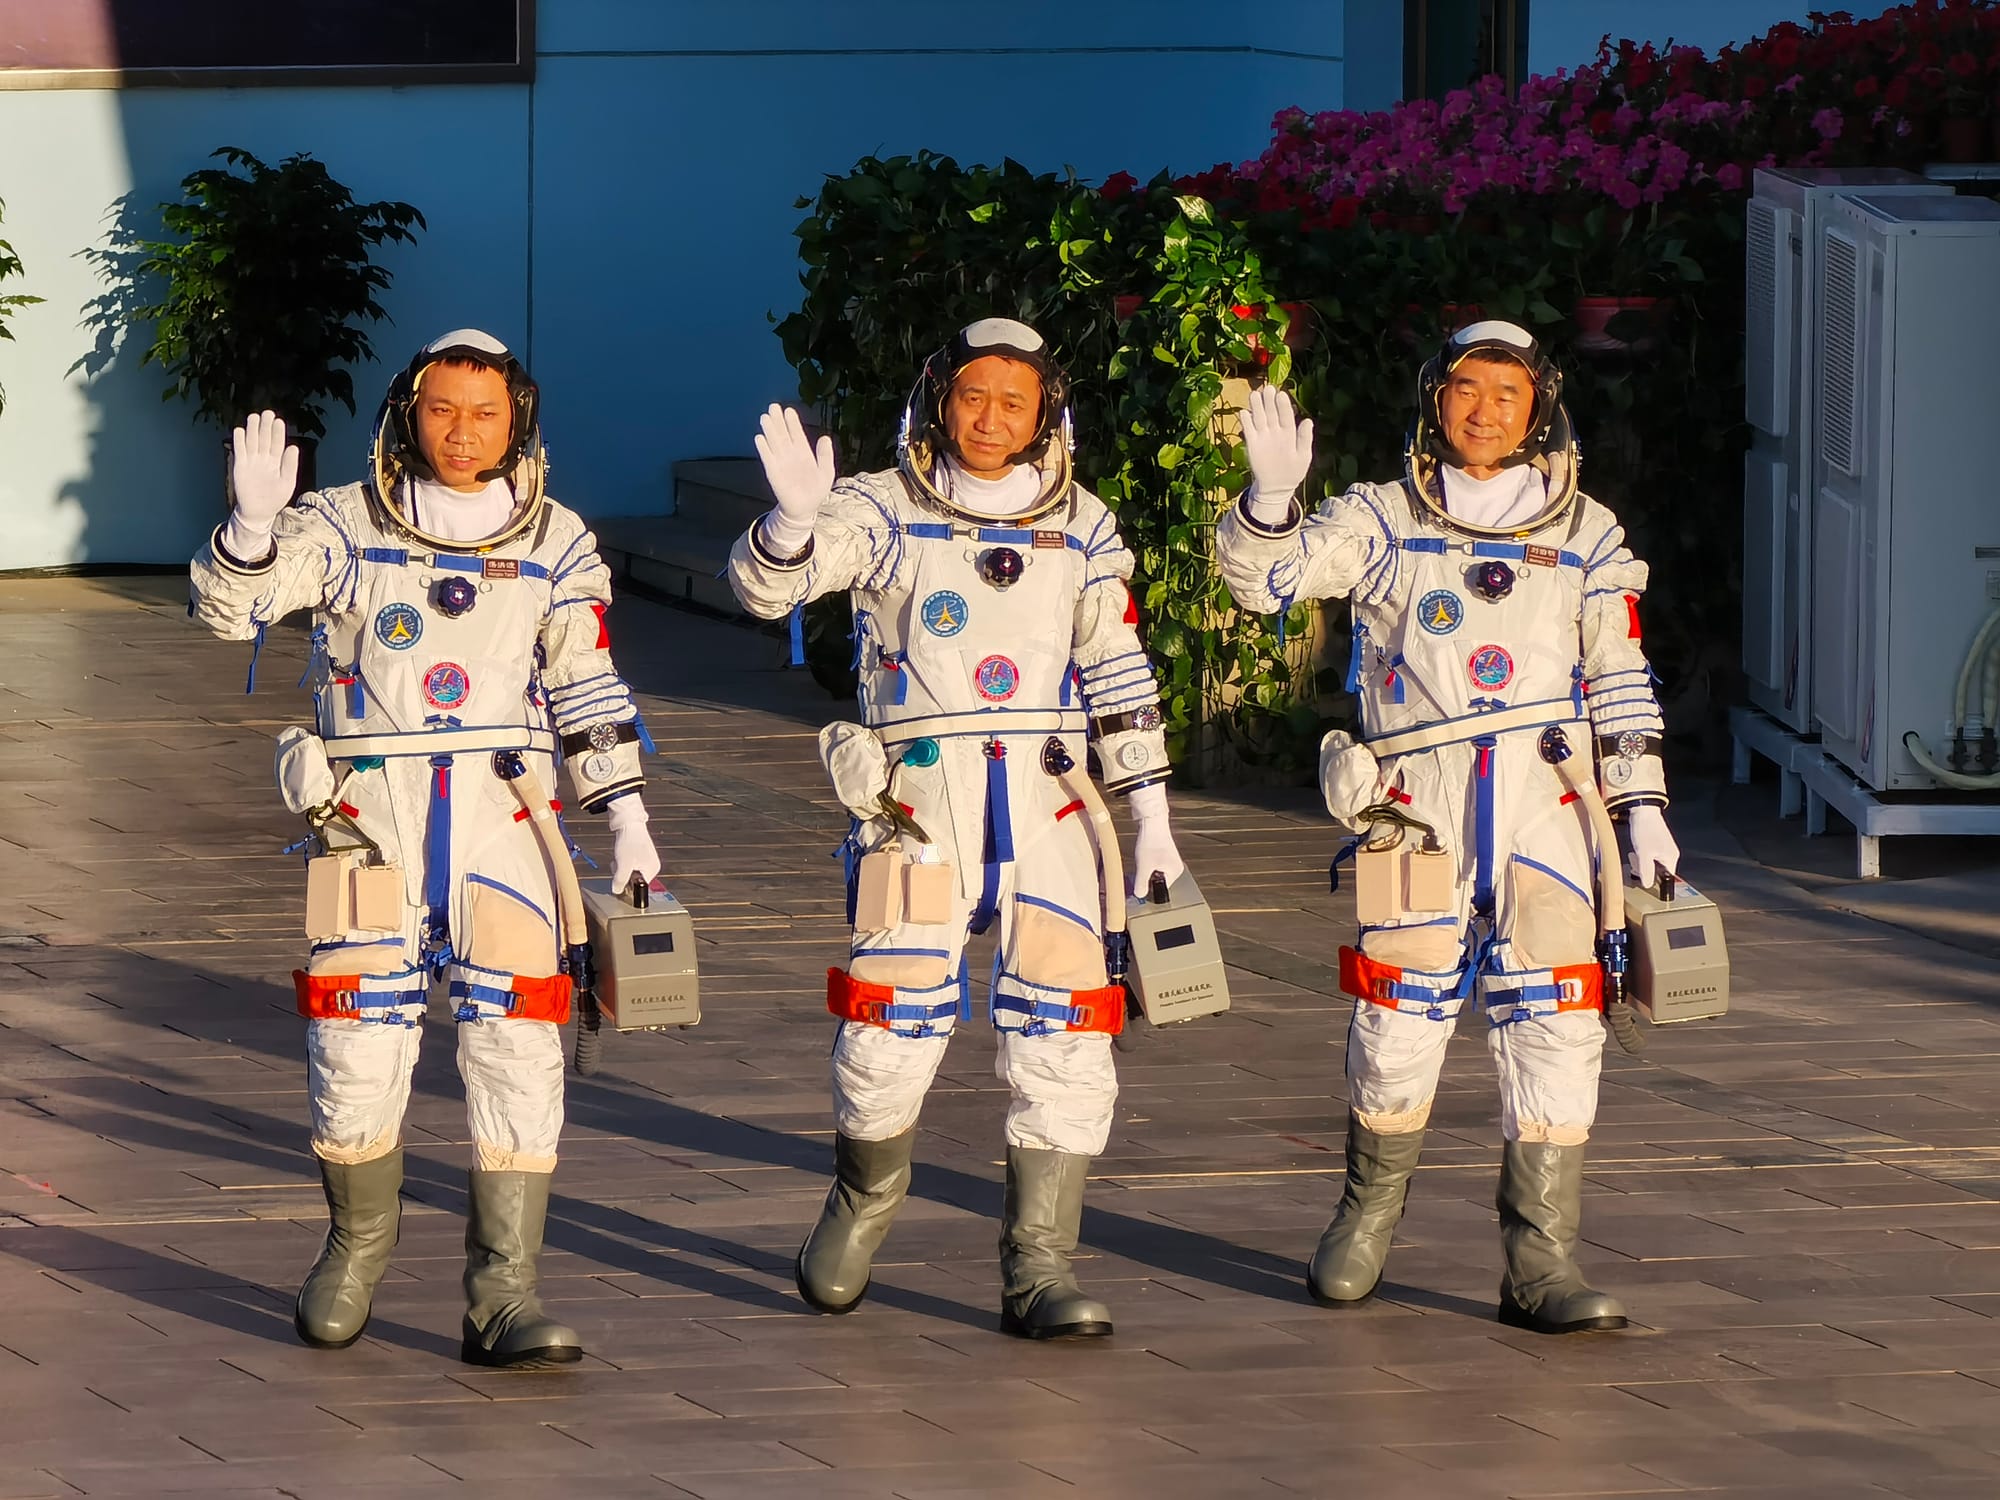 The crew of Shenzhou-12 during their walkout before launch, (from left to right) Tang Hongbo, Nie Haisheng, and Liu Boming. ©China Manned Space Agency